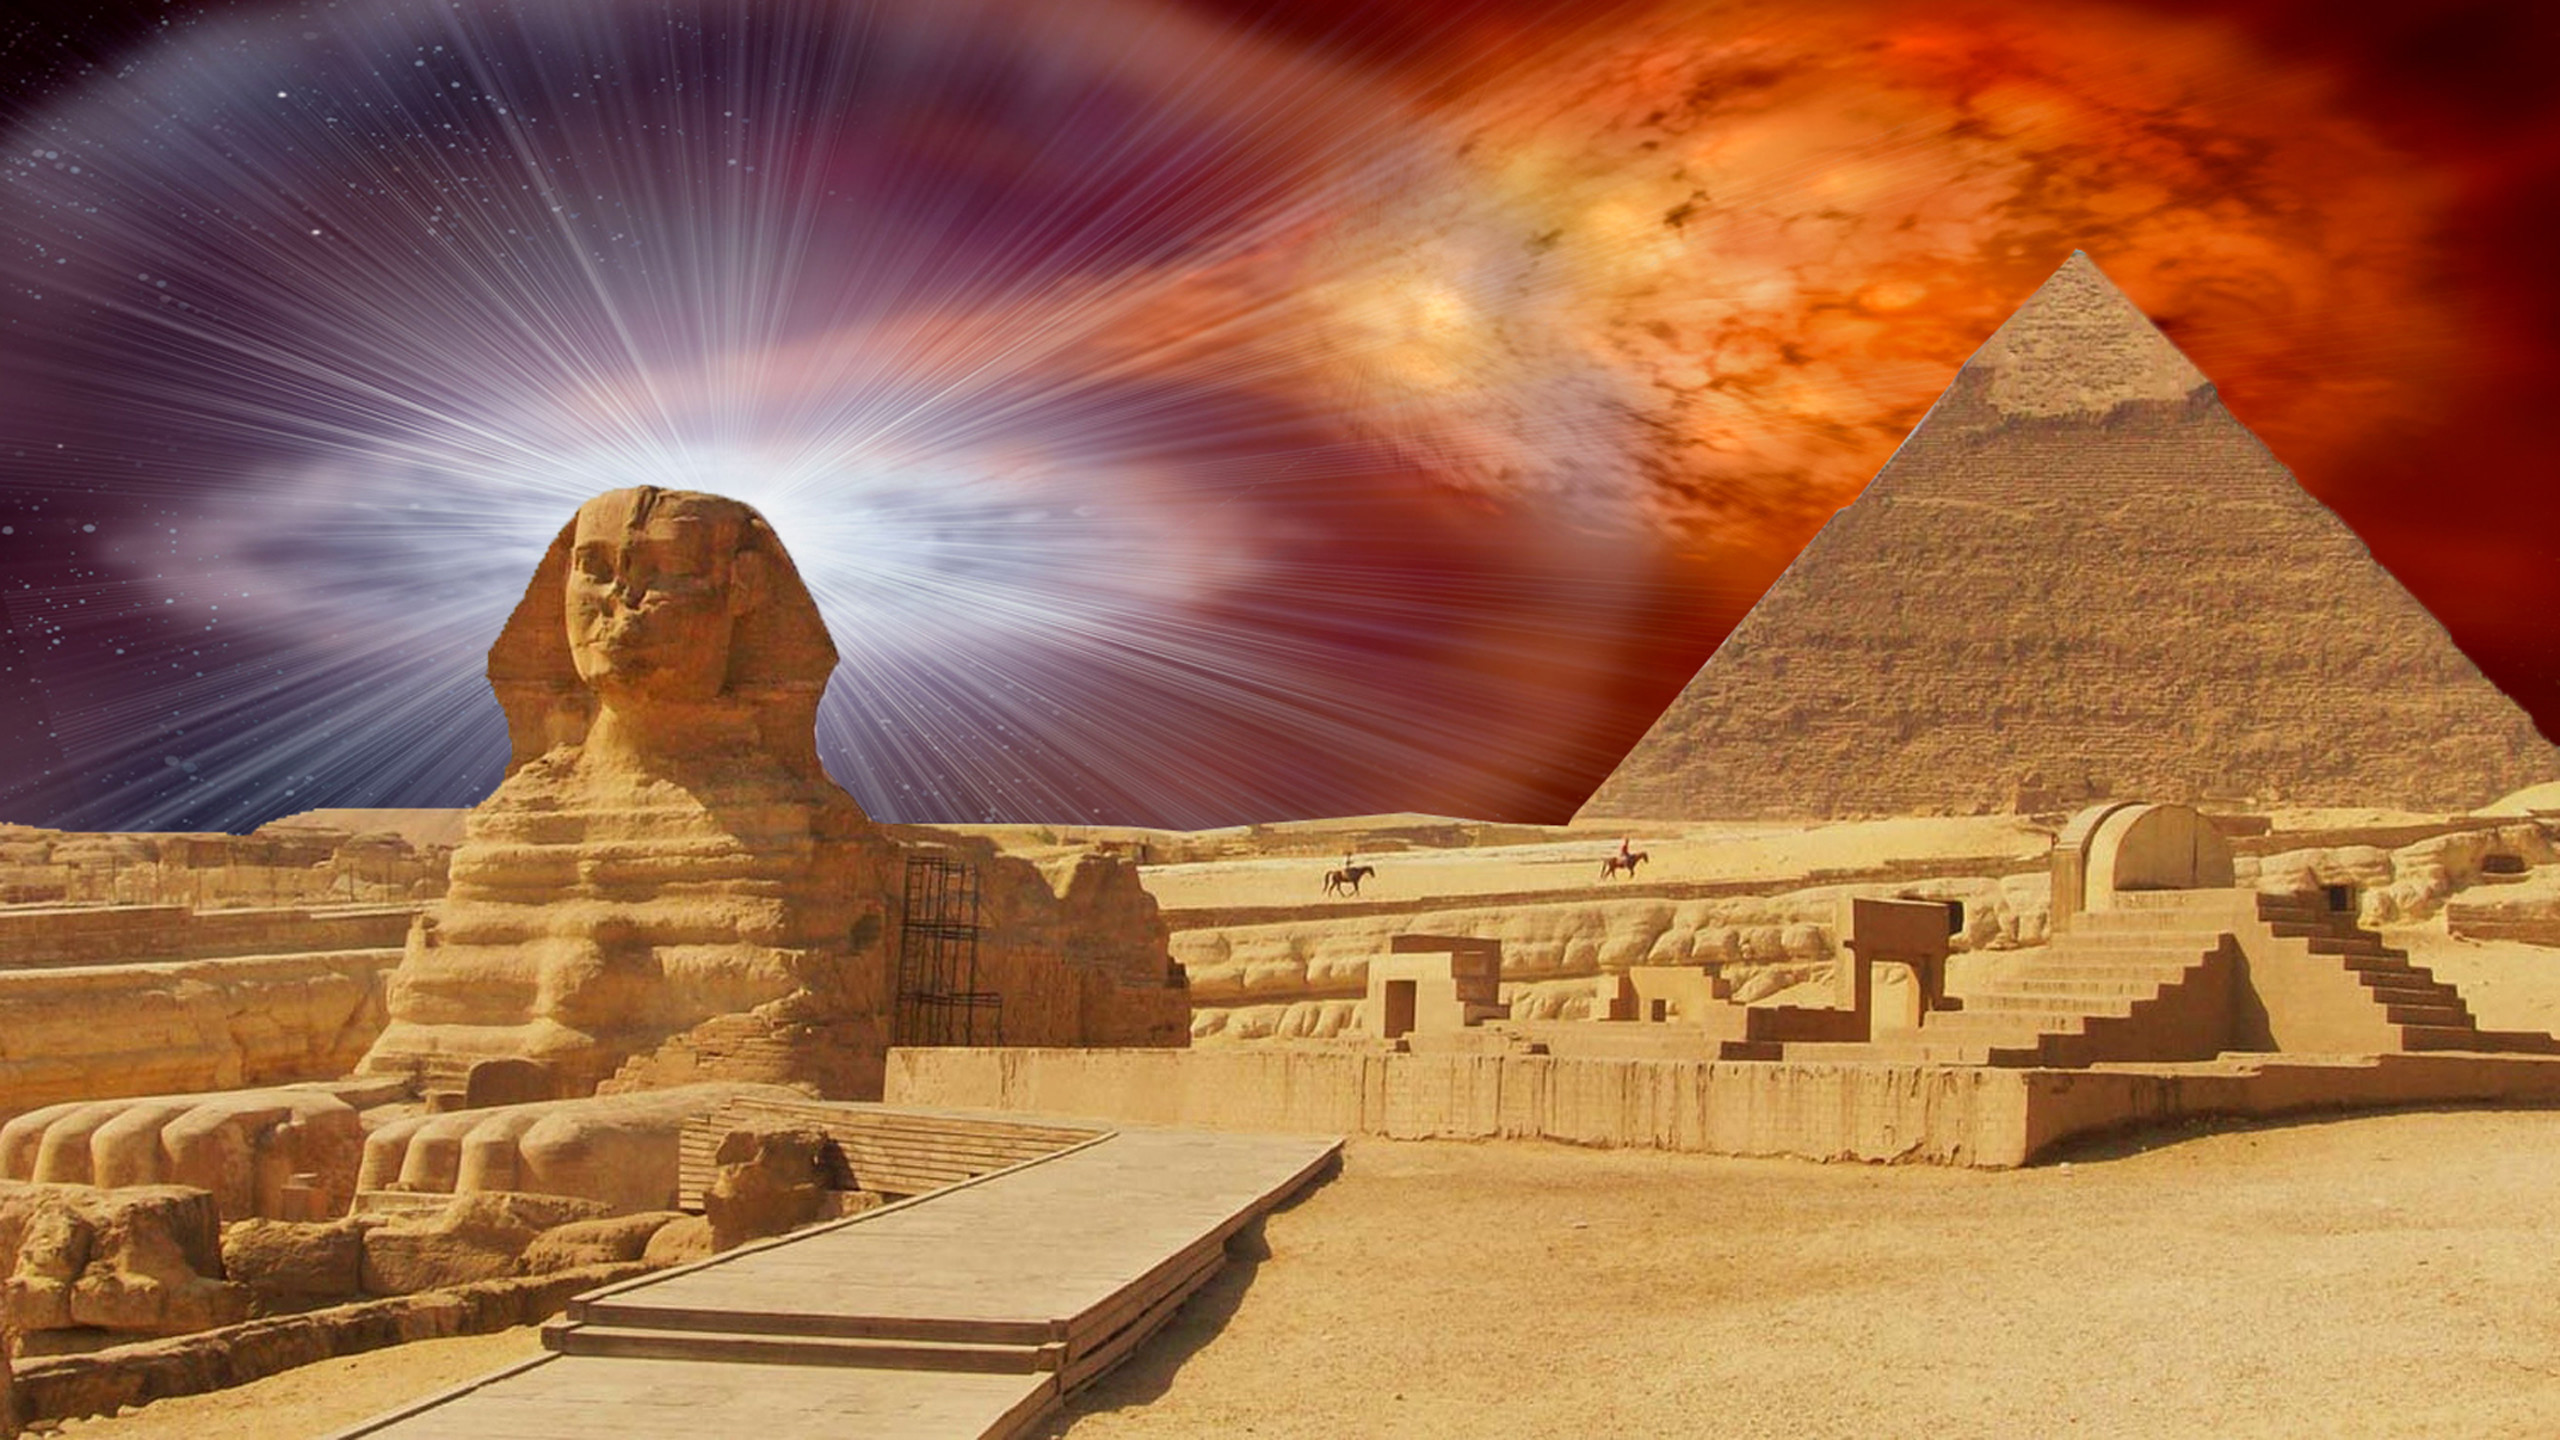 2560x1440 Egypt Pyramid The Great Sphinx Of Giza With The Pyramid Of ..